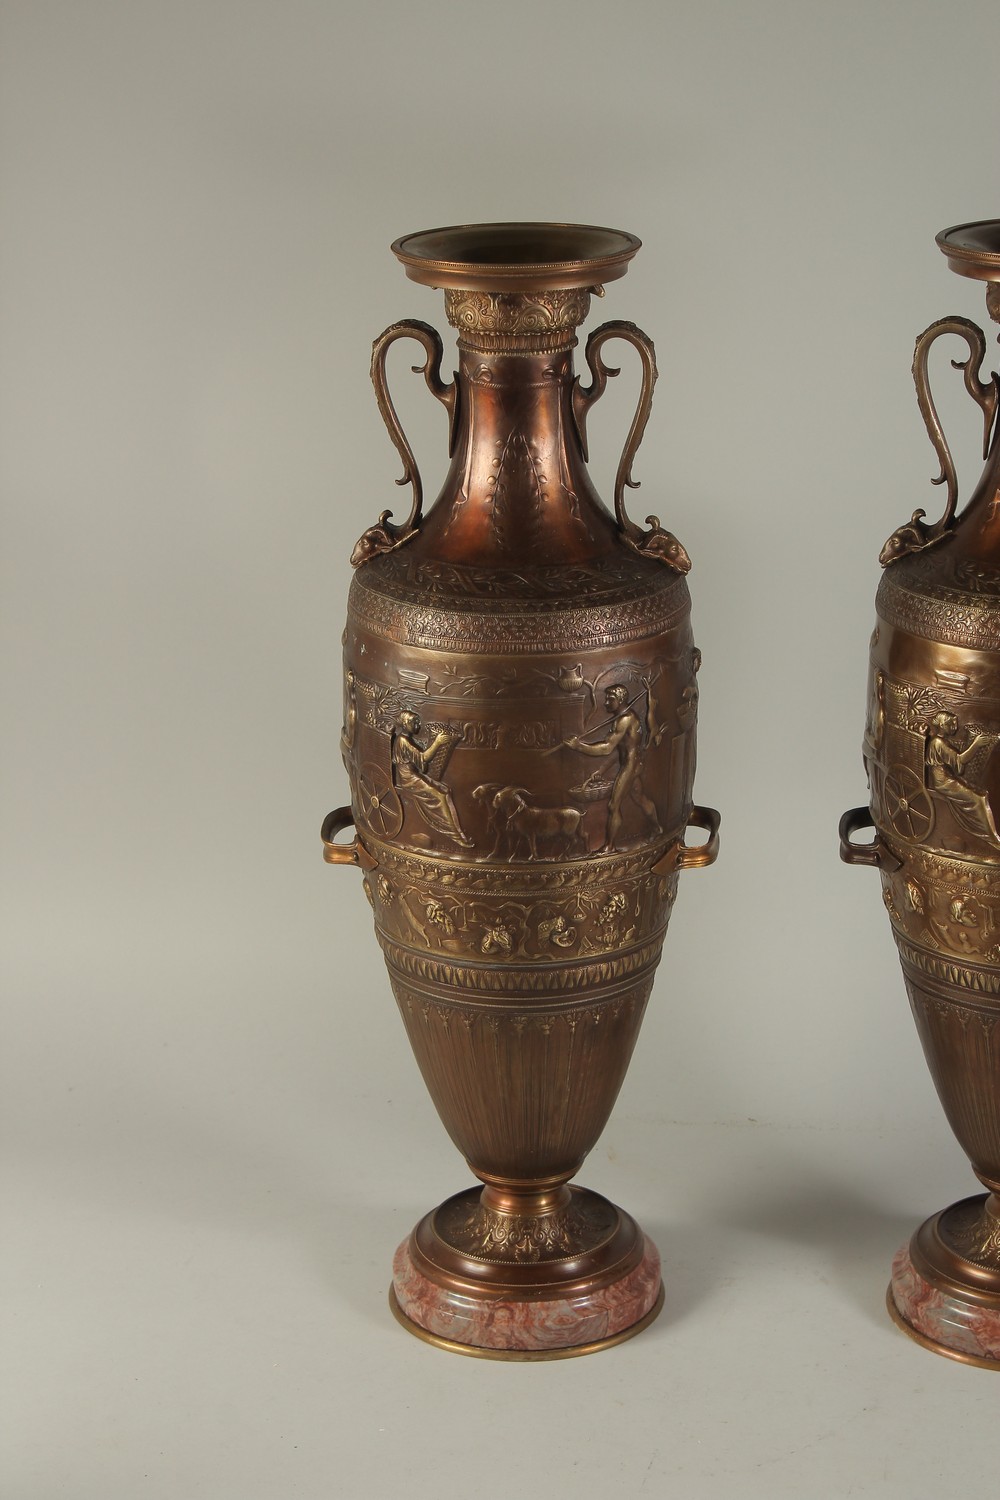 A SUPERB PAIR OF TWO-HANDLED CLASSICAL BRONZE URNS decorated with panels of classical figures. - Image 2 of 4